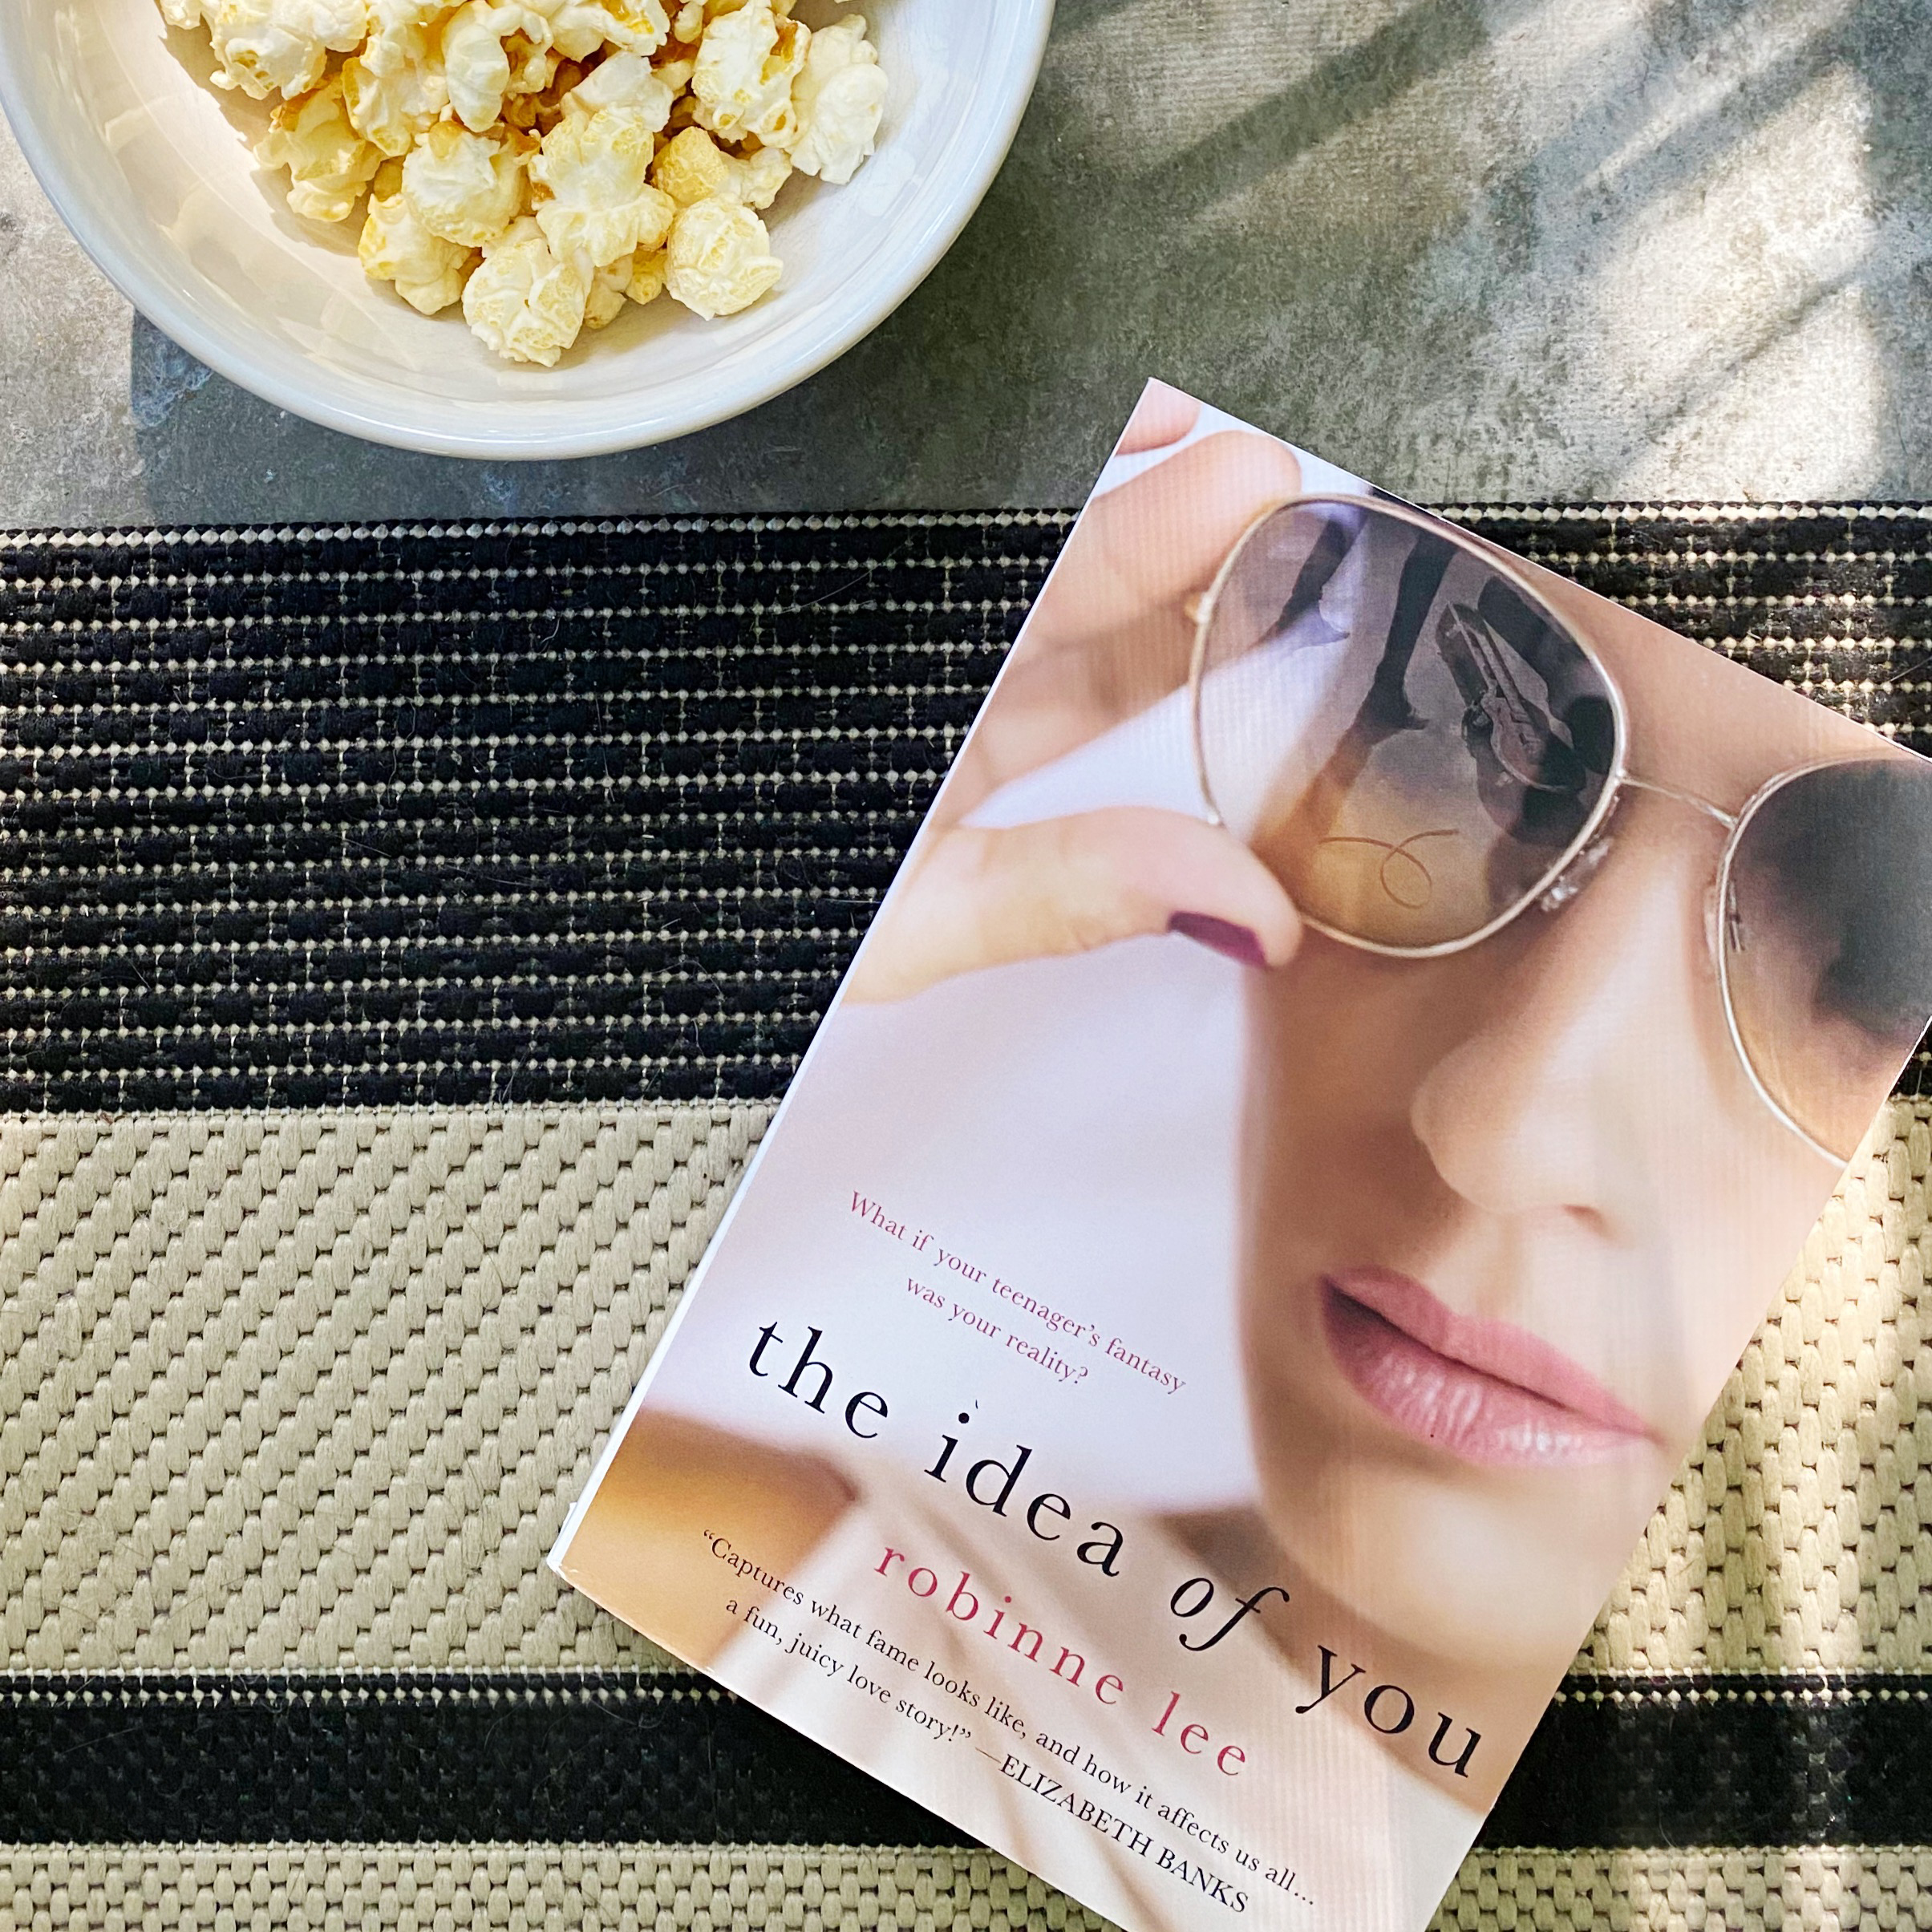 Michelle shares a book review of The Idea of You, plus four joyful finds, including a kitchen gadget, an Instagram account, an Etsy print shop, and a recipe.